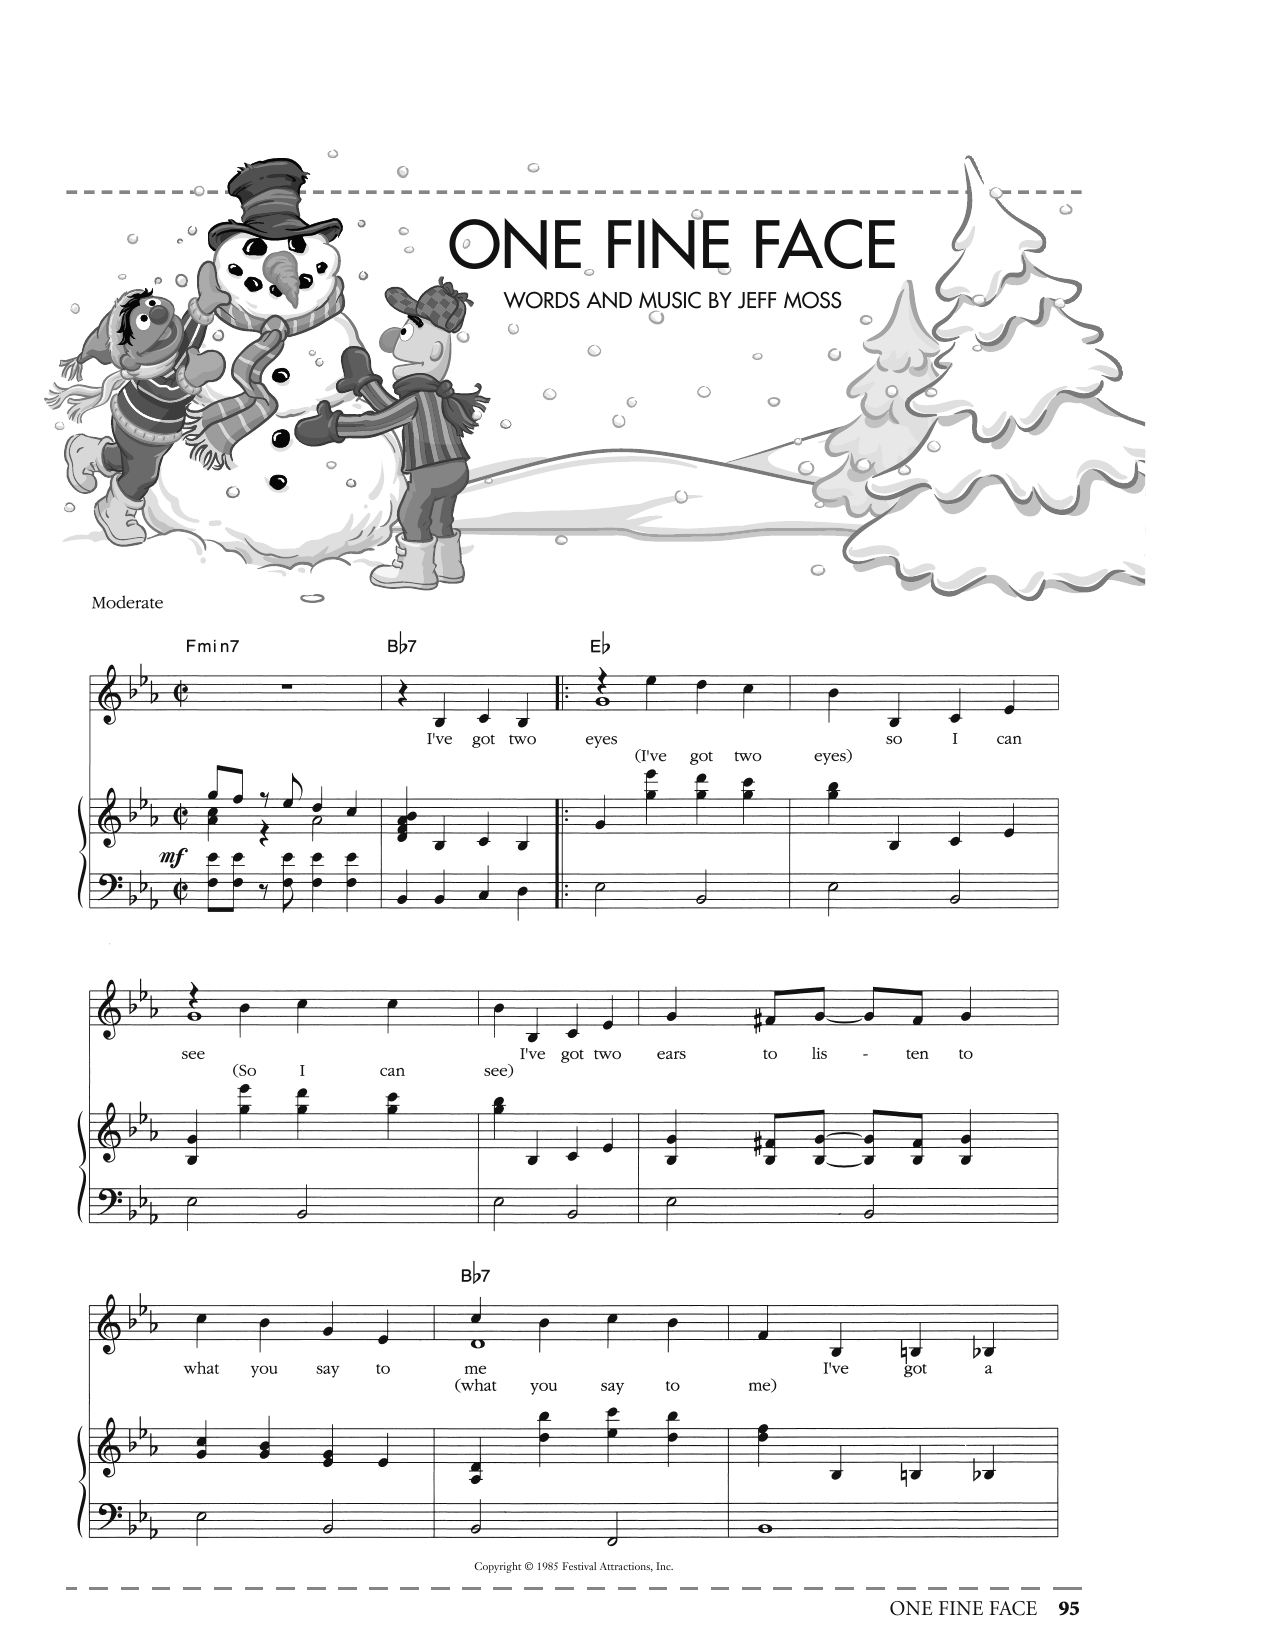 Jeff Moss One Fine Face (from Sesame Street) sheet music notes printable PDF score